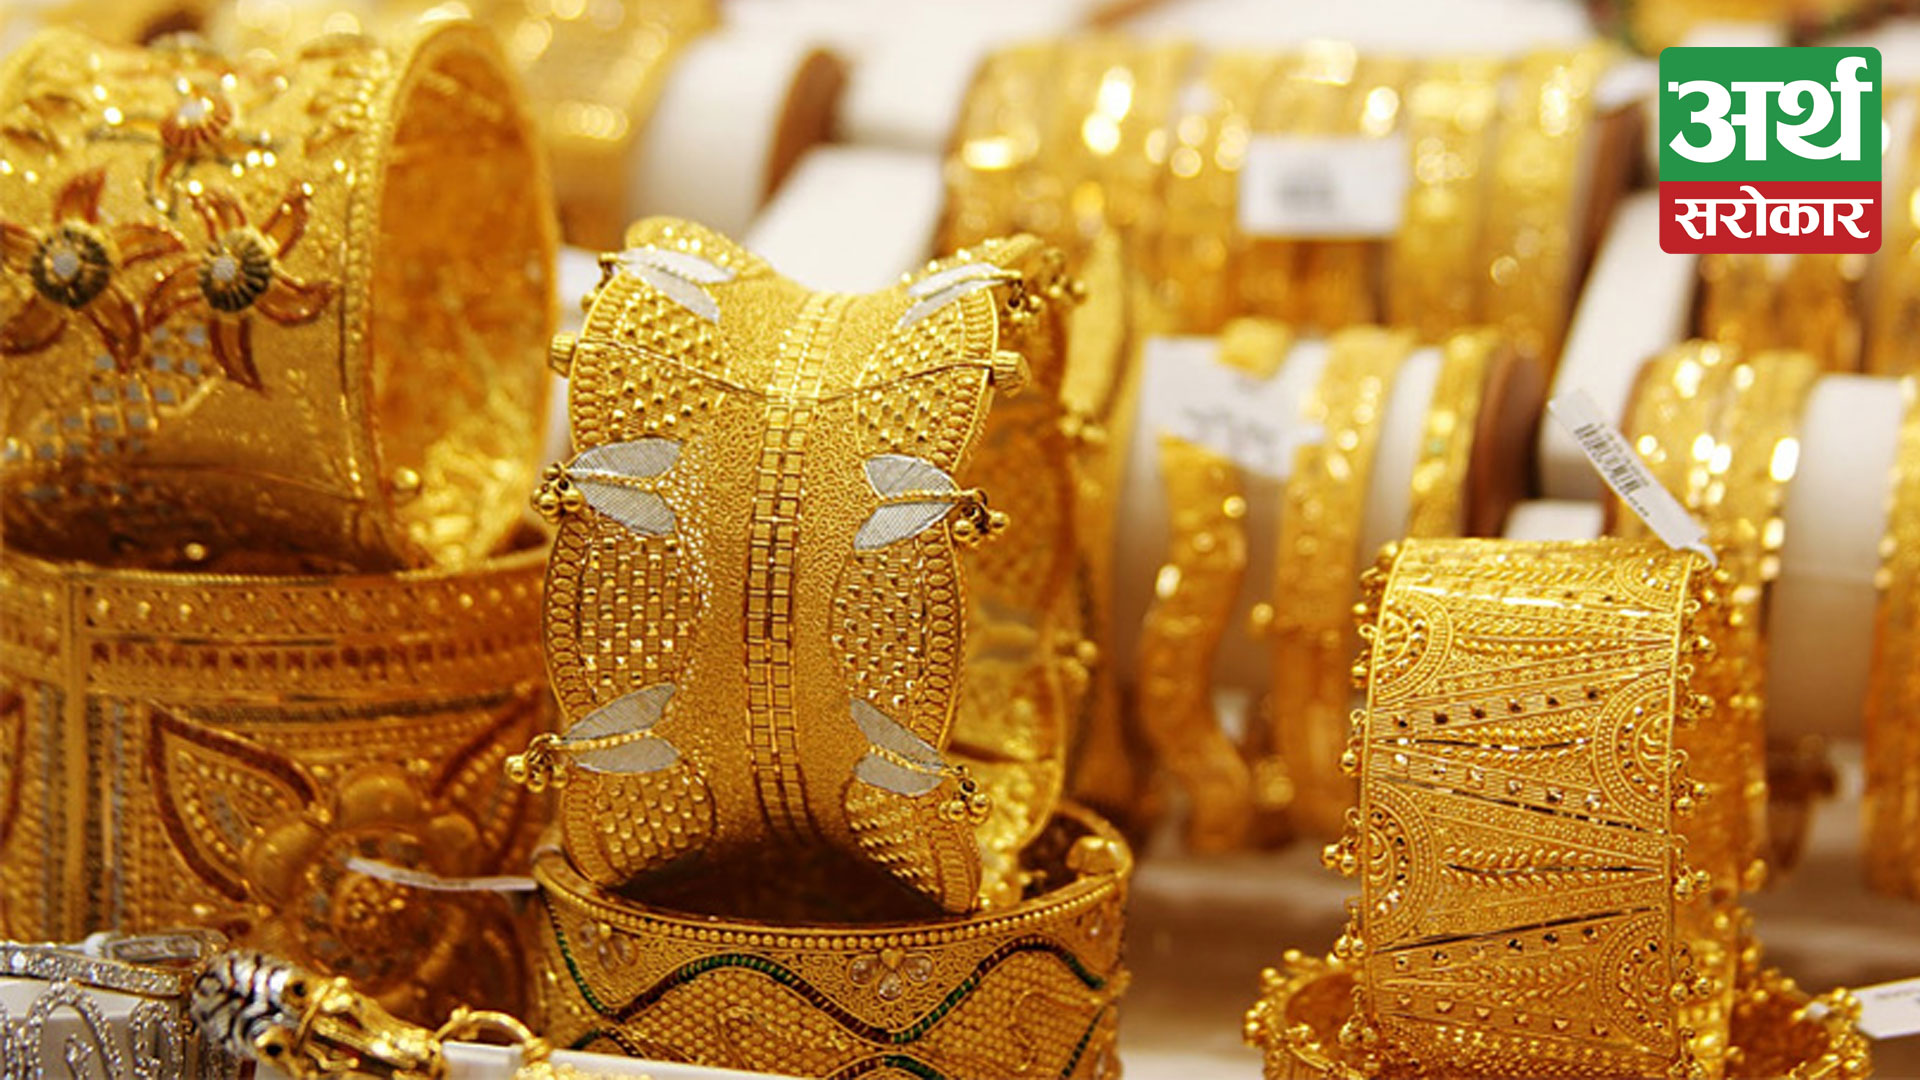 Price of gold decreased by 800 rupees per tola